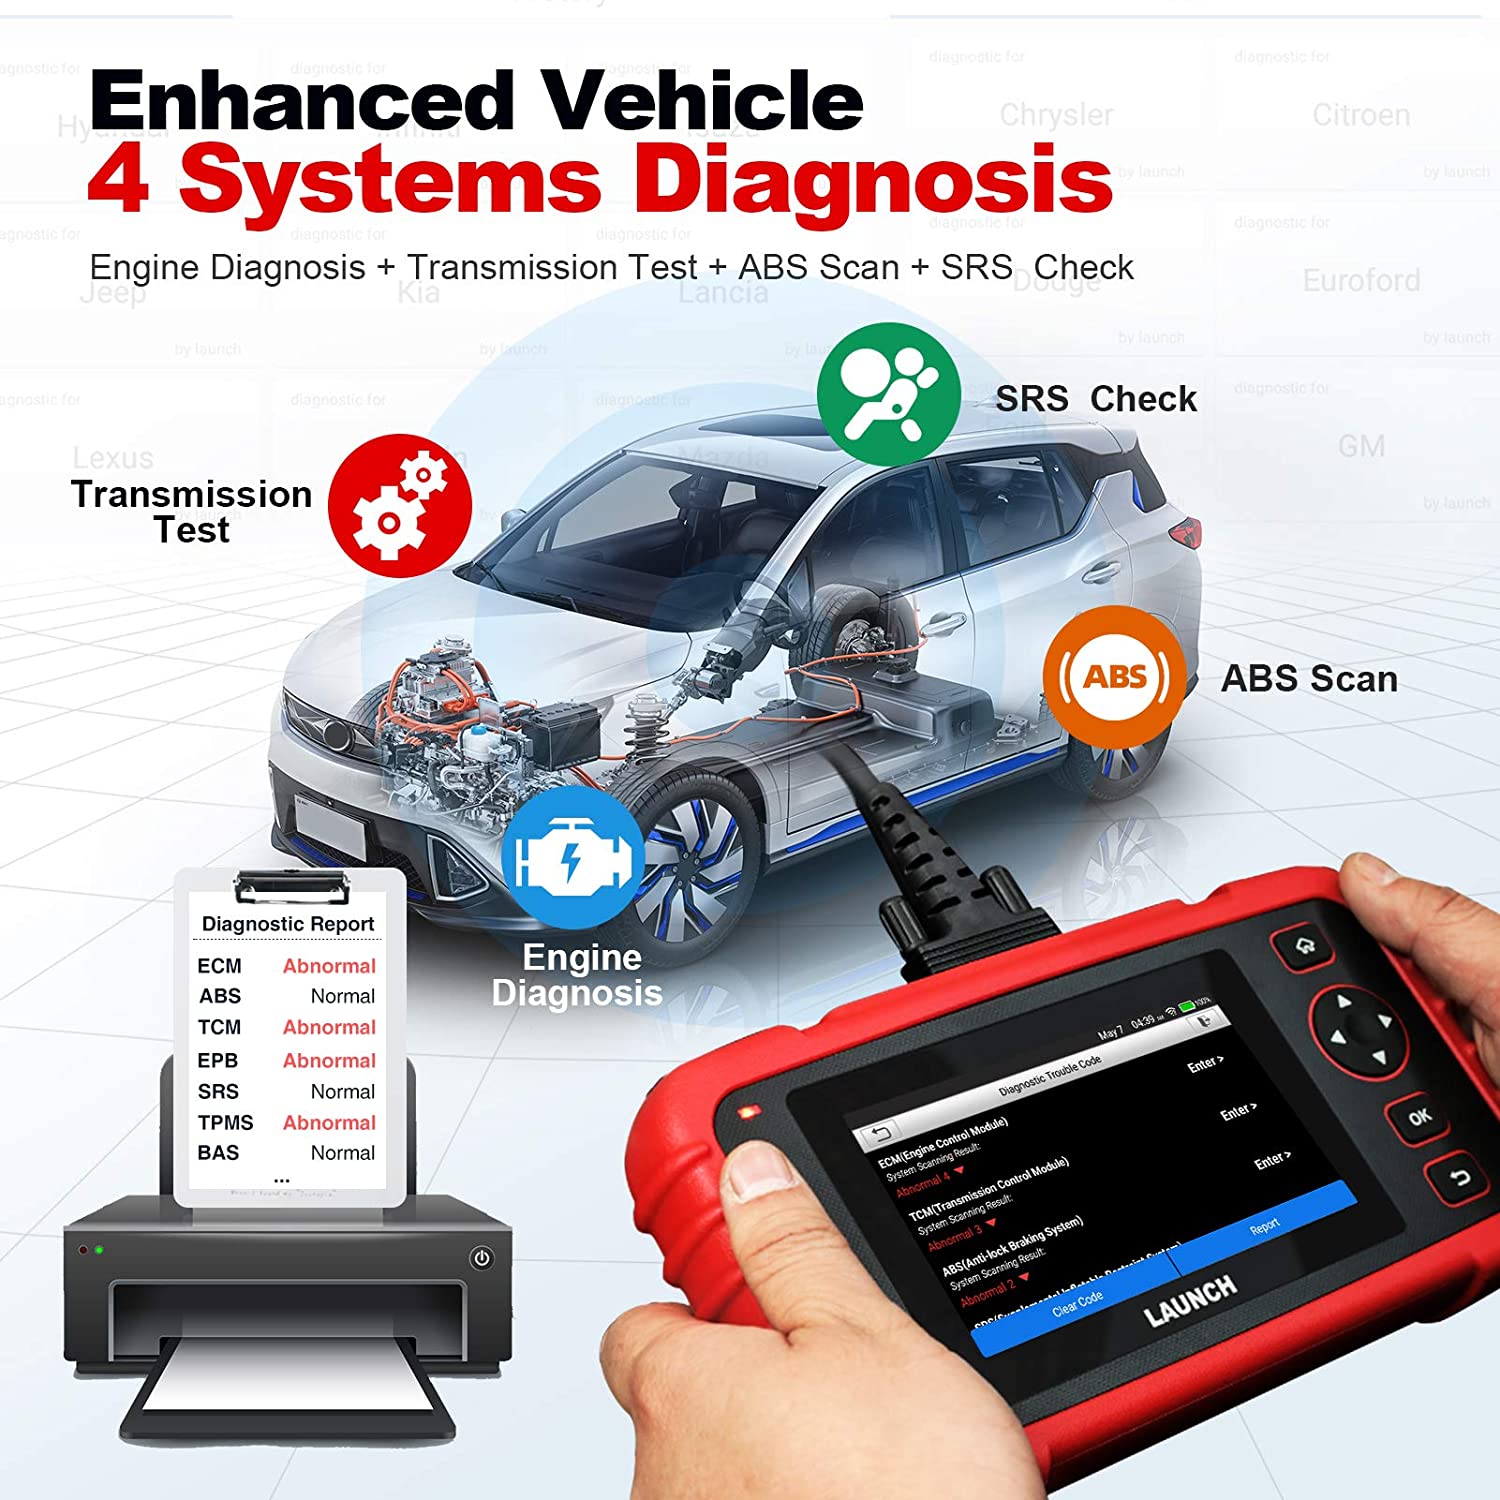 X-431 LAUNCH CRP123X OBD2 Scanner Auto Code Reader Car Diagnostic Tool ENG  AT ABS SRS WIFI Diagnostics Scan OBDII Automotive